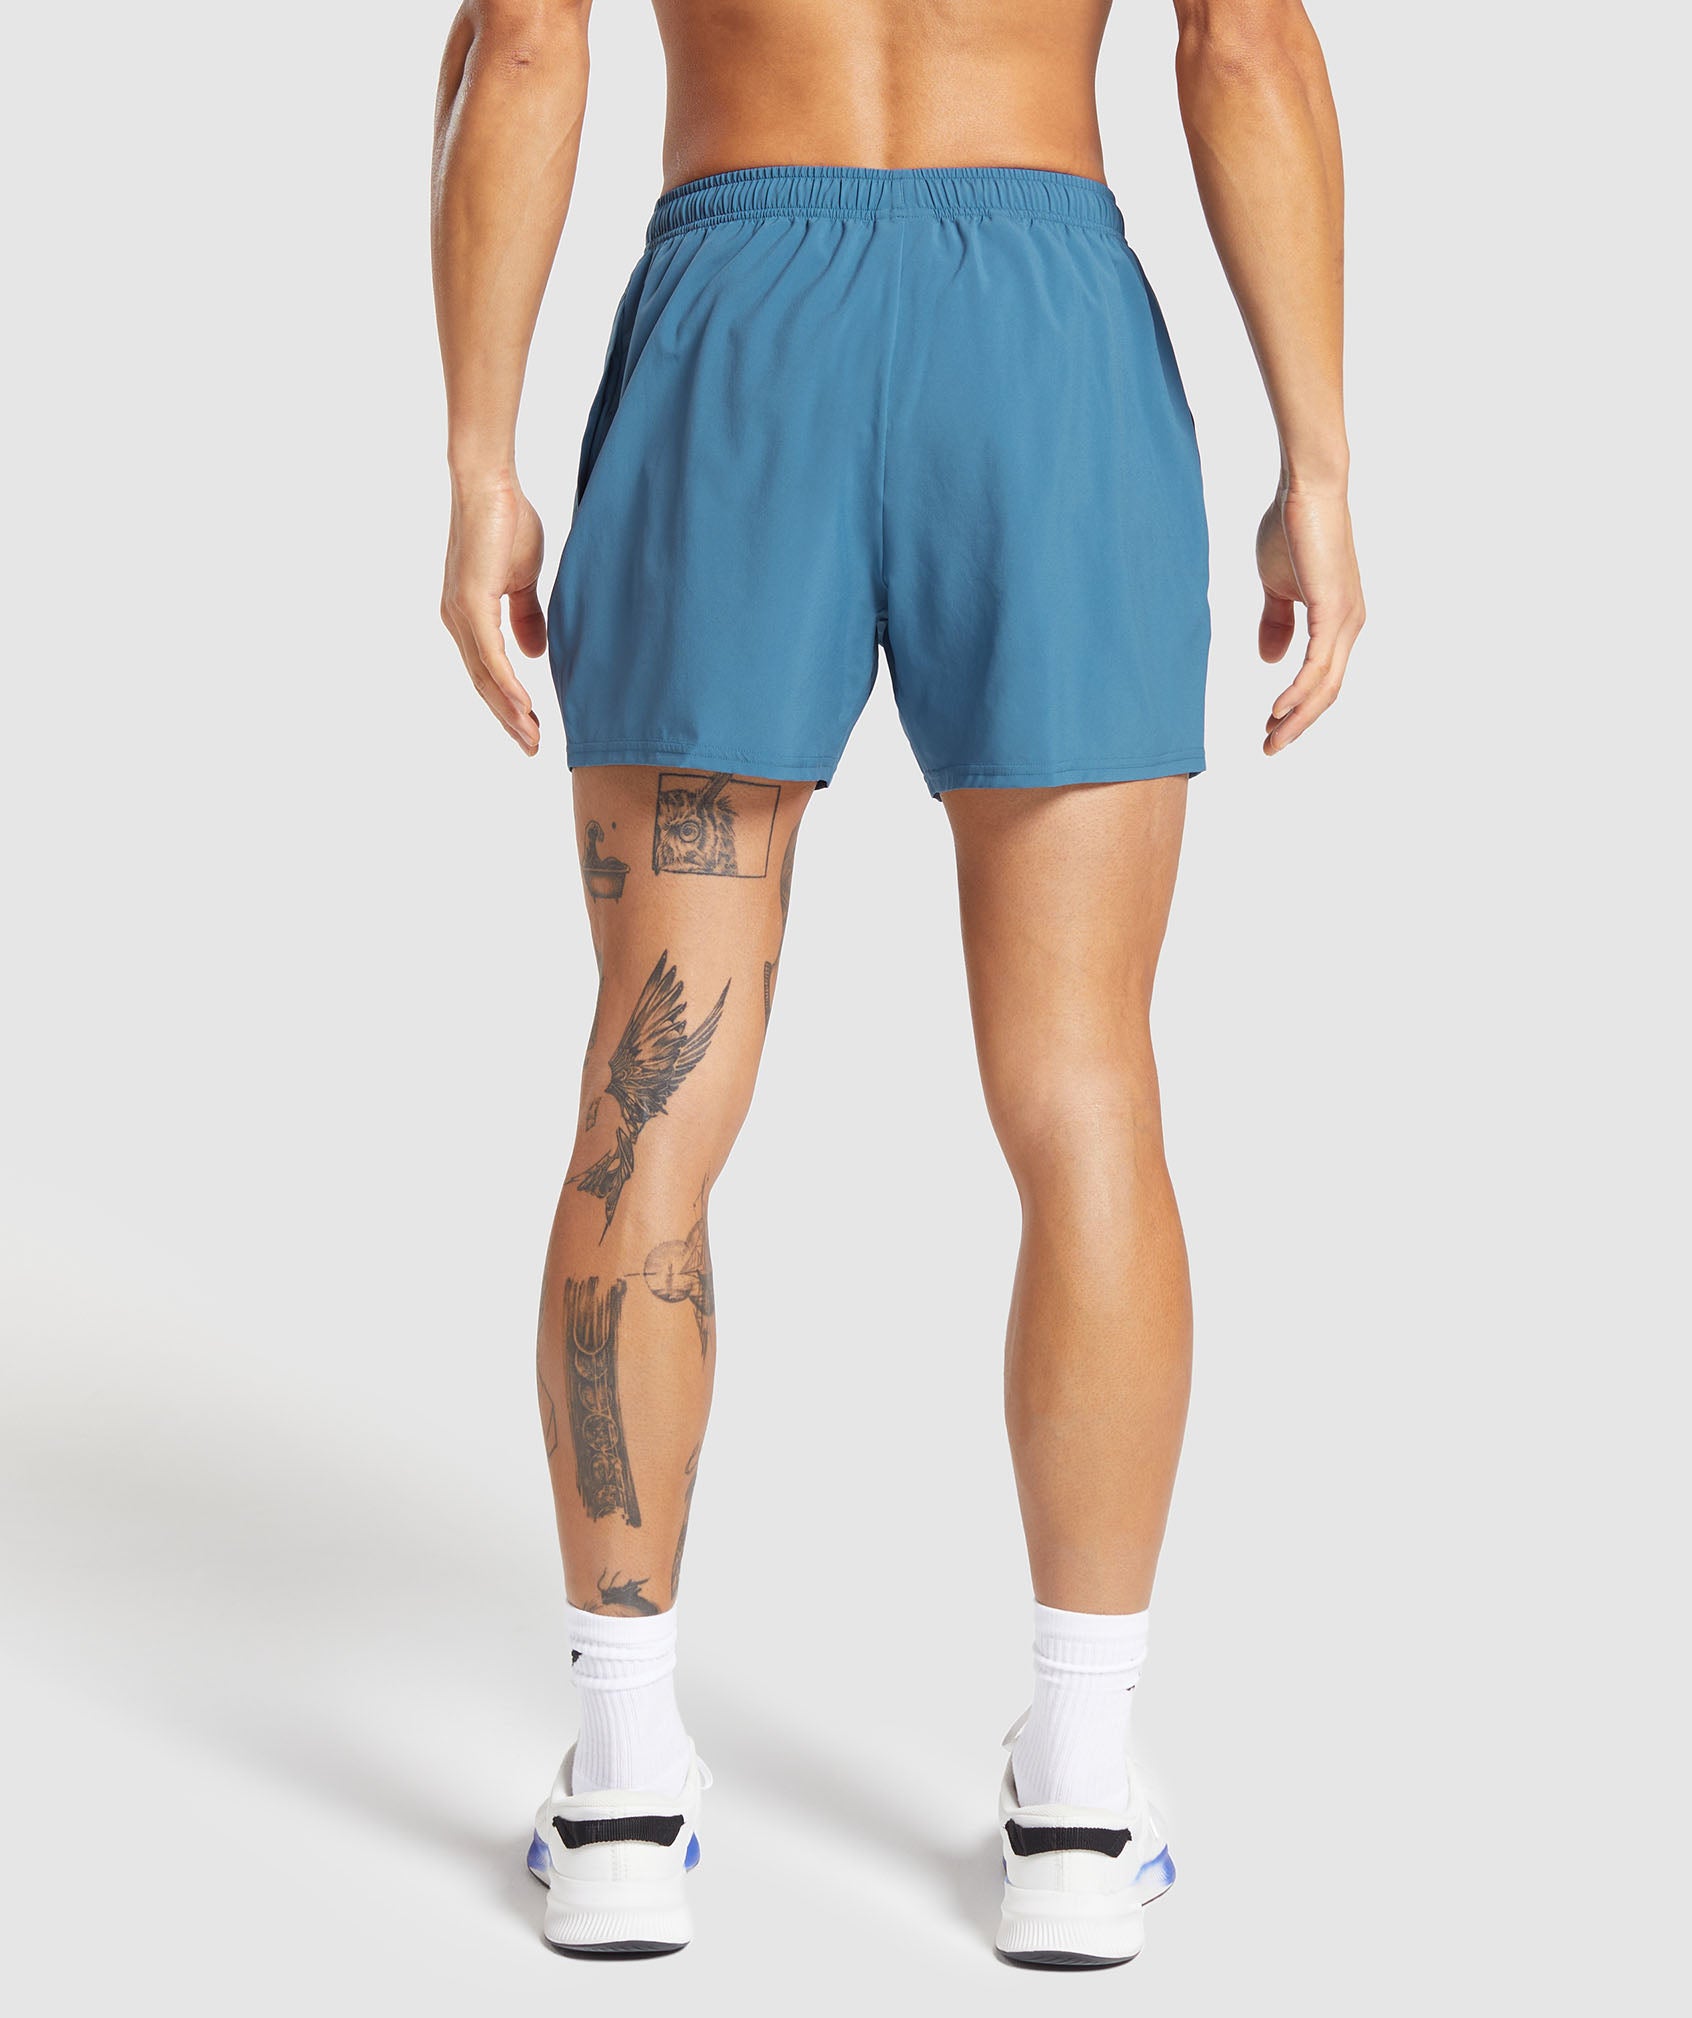 Arrival 5" Shorts in Utility Blue - view 2